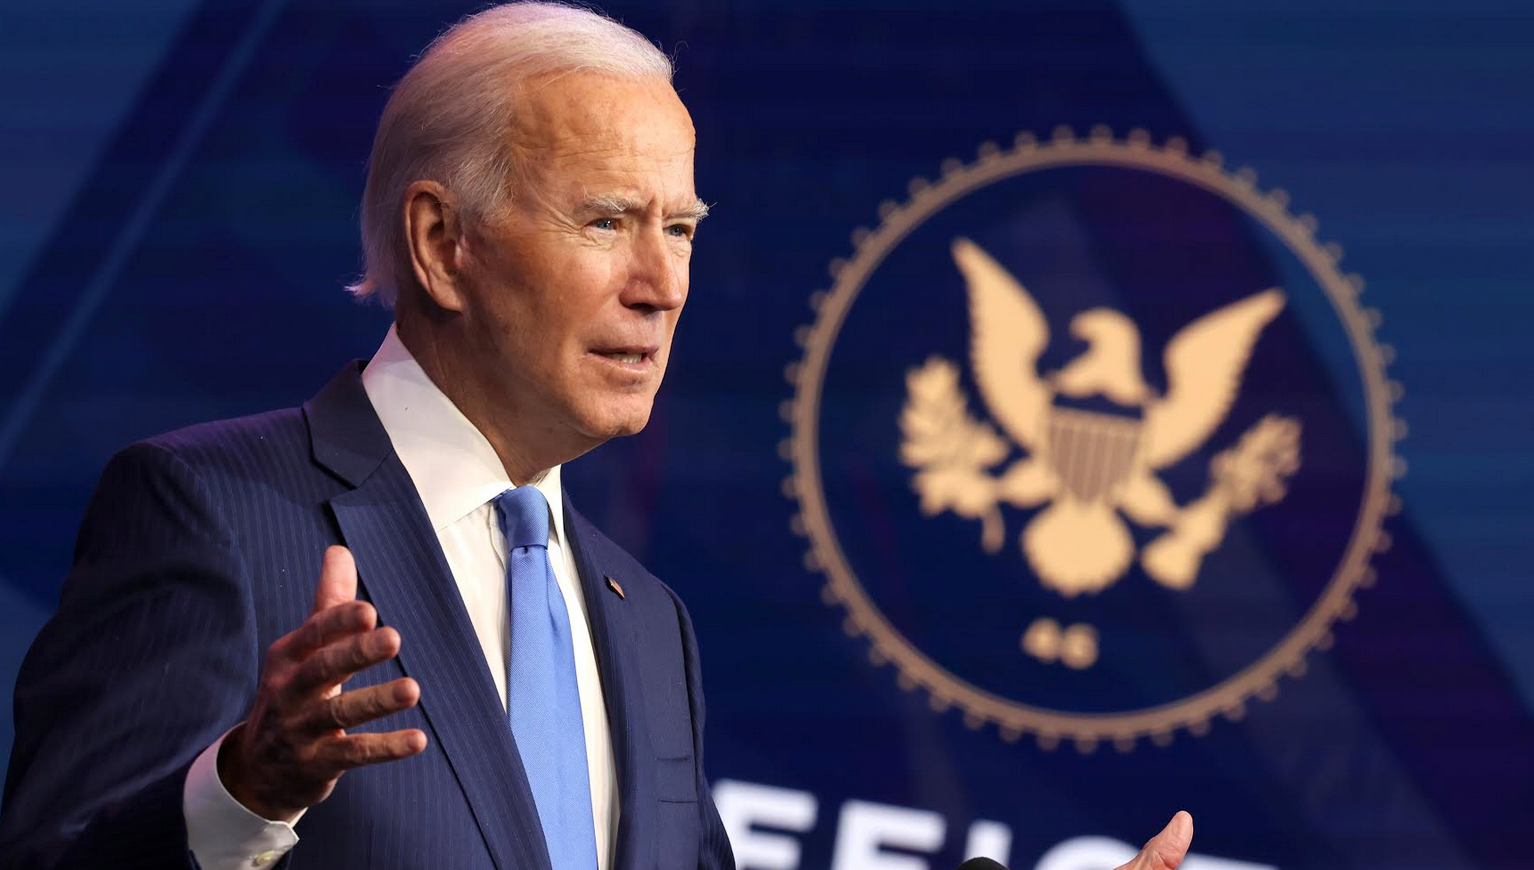 President-elect Joe Biden speaks during an event to announce new cabinet nominations at the Queen Theatre on December 11, 2020 in Wilmington, Delaware. (Photo: Chip Somodevilla/Getty Images)